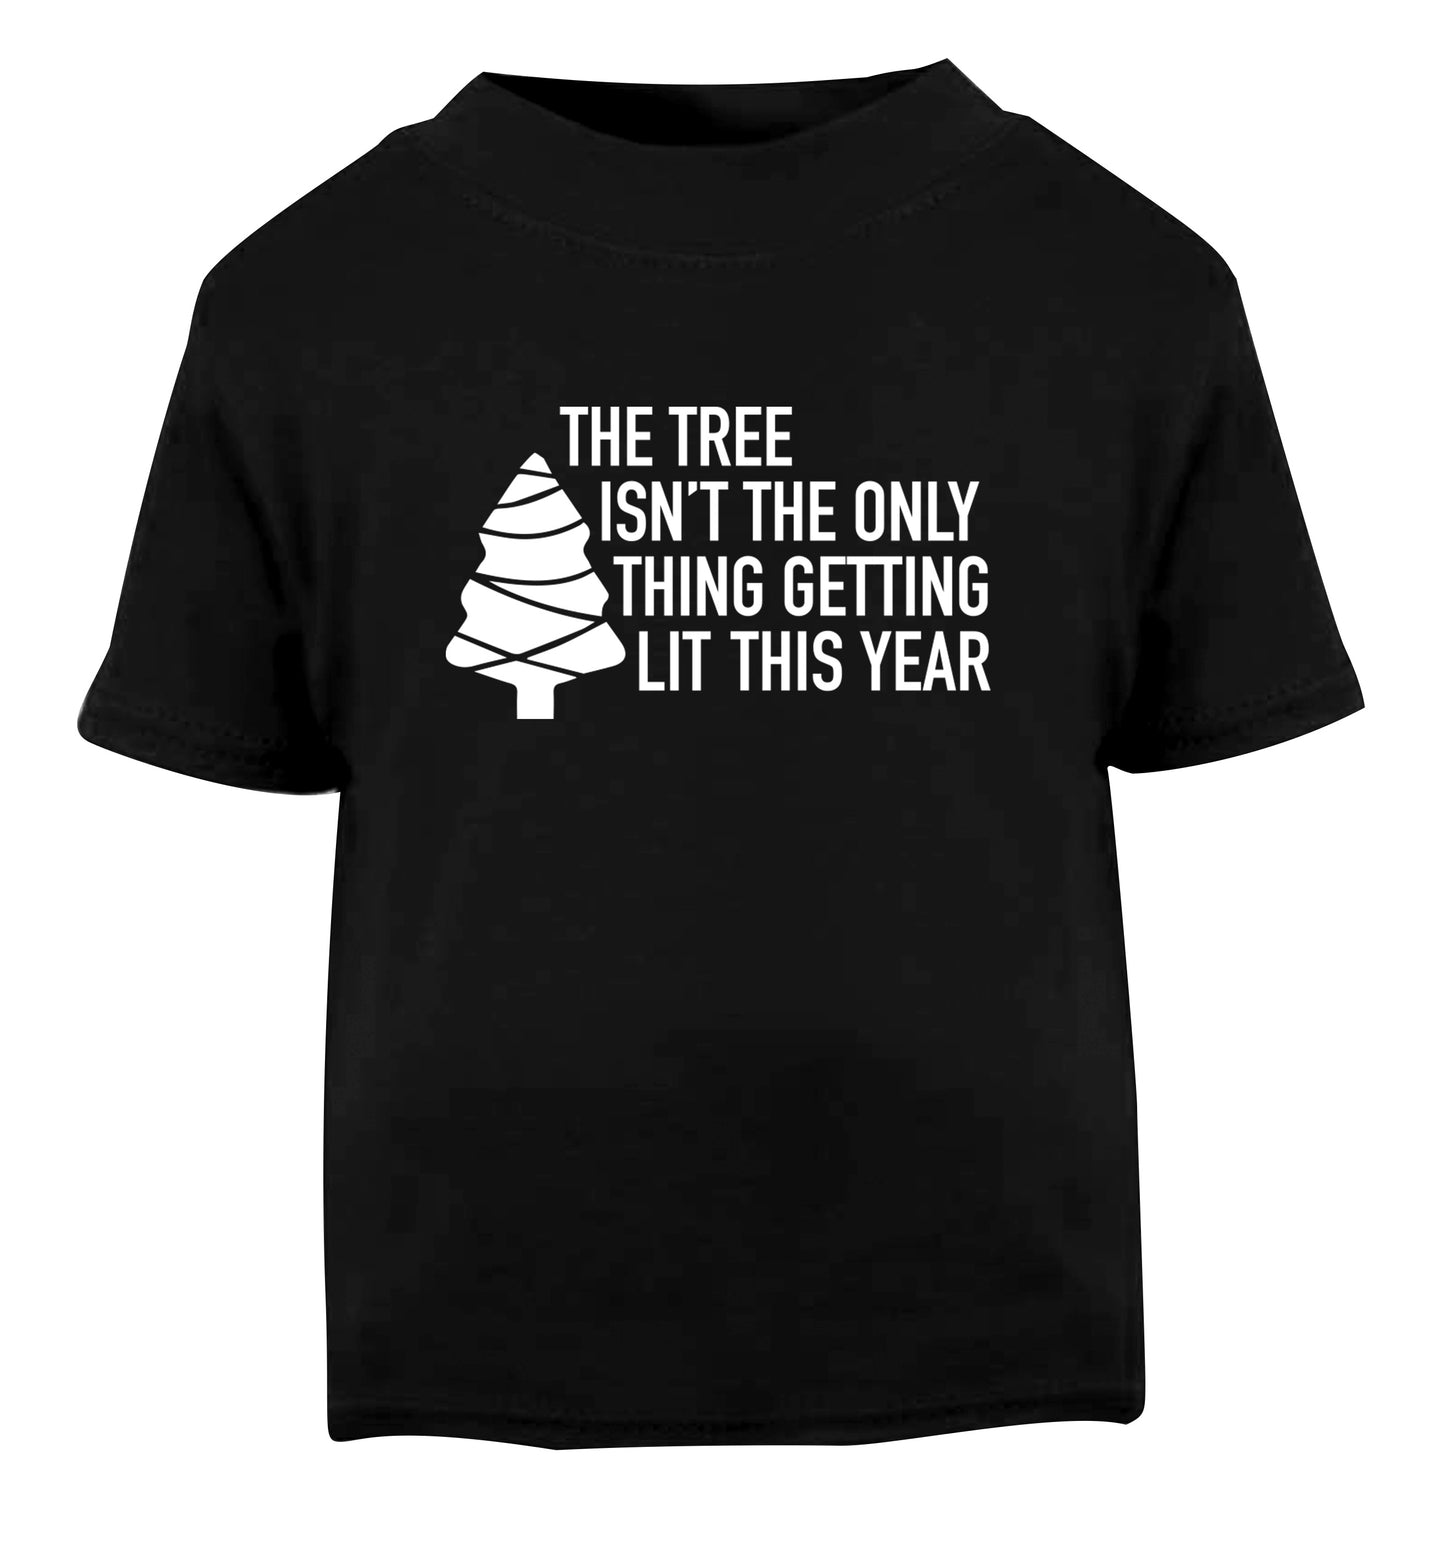 The tree isn't the only thing getting lit this year Black Baby Toddler Tshirt 2 years